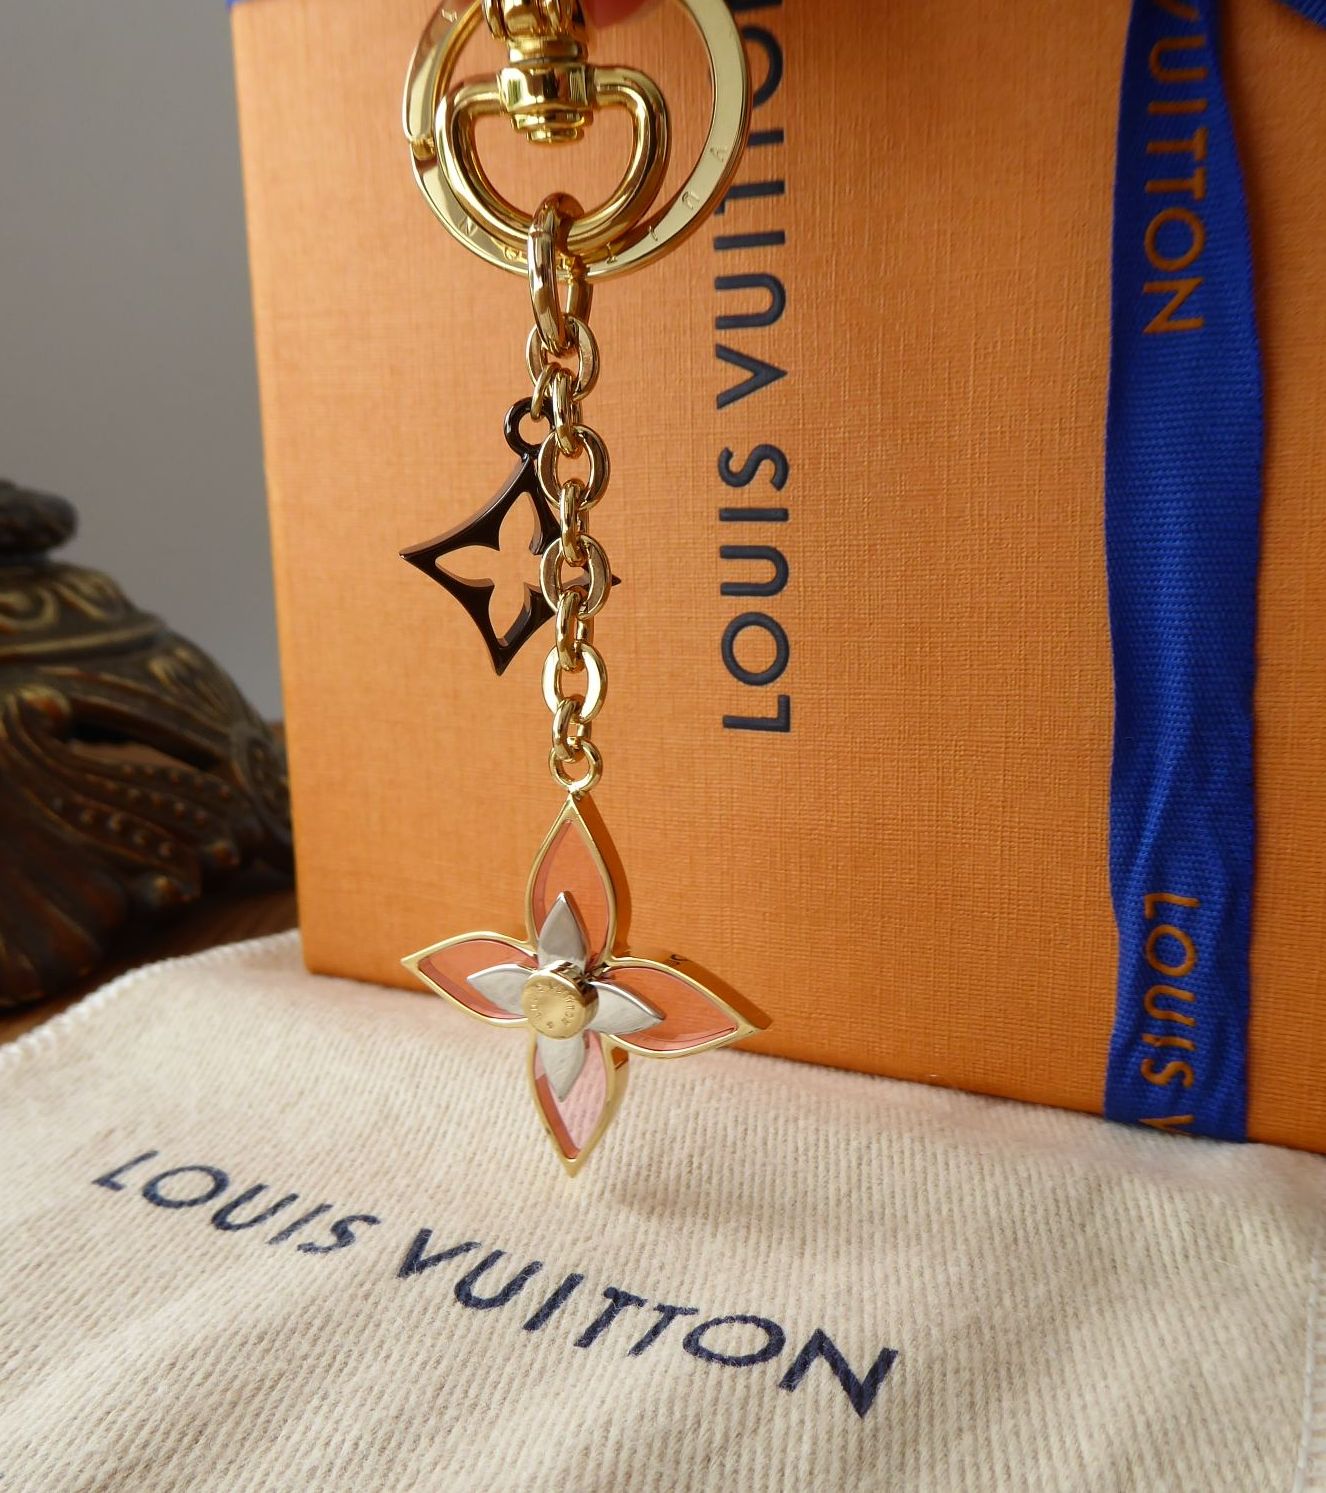 Louis Vuitton Blooming Flowers BB Bag Charm and Keyholder - SOLD